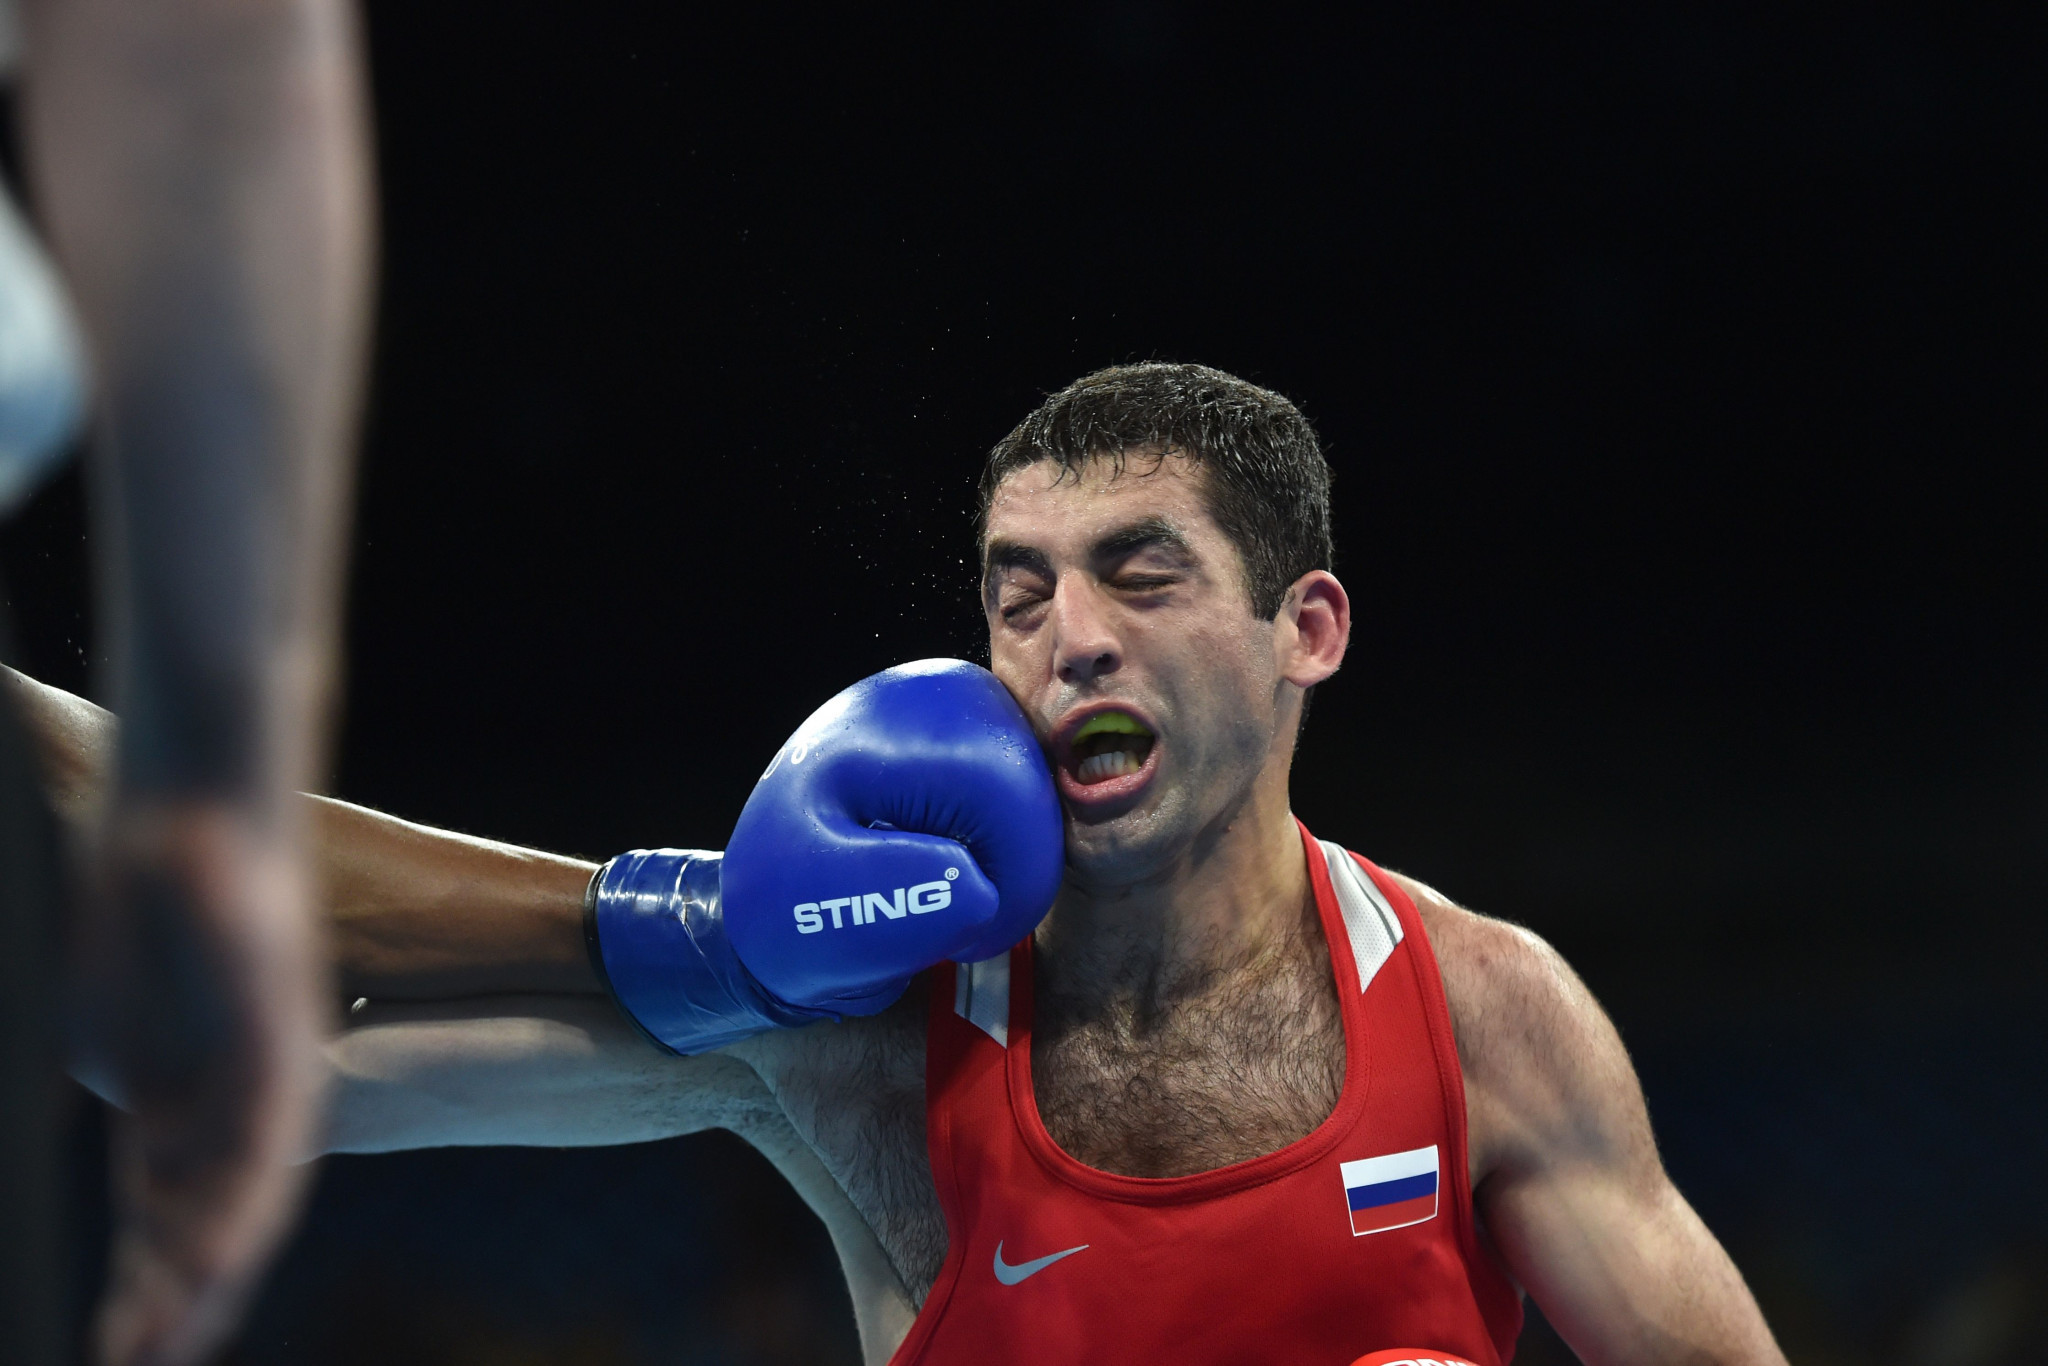 Boxing being held hostage by Moscow, van der Vorst claims, as IBA lifts Russia and Belarus ban